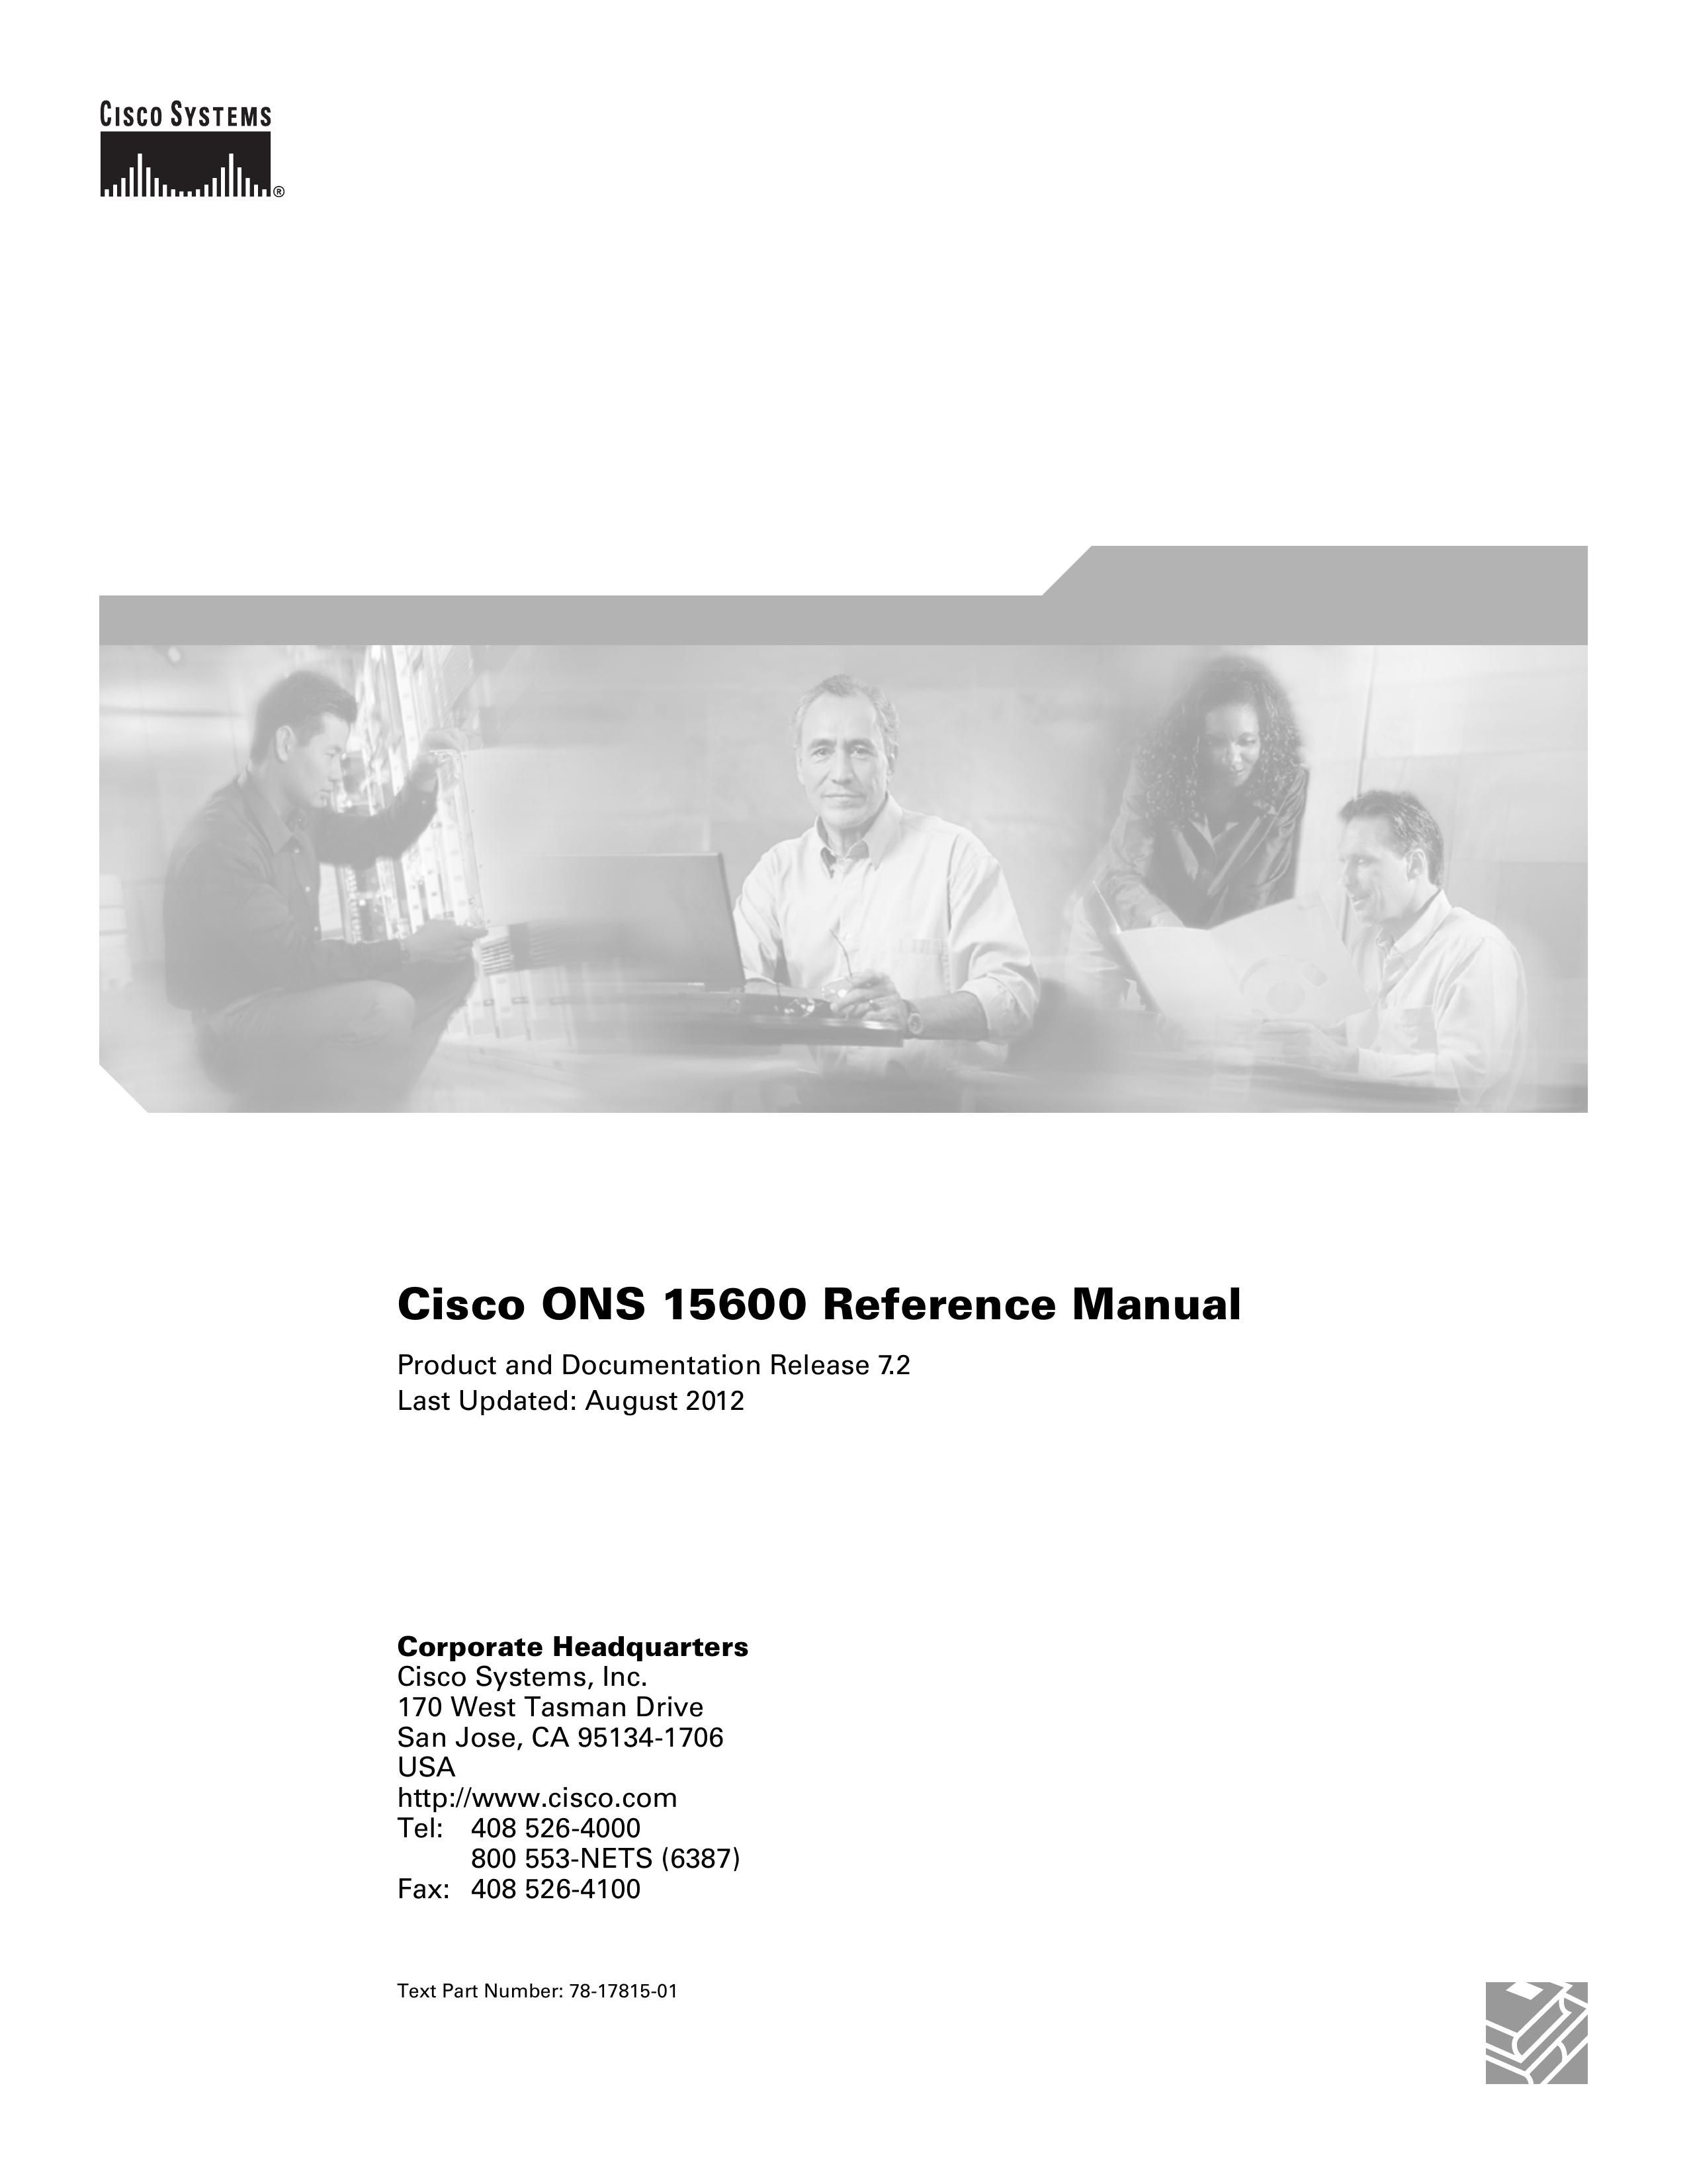 Cisco Systems ONS 15600 Security Camera User Manual